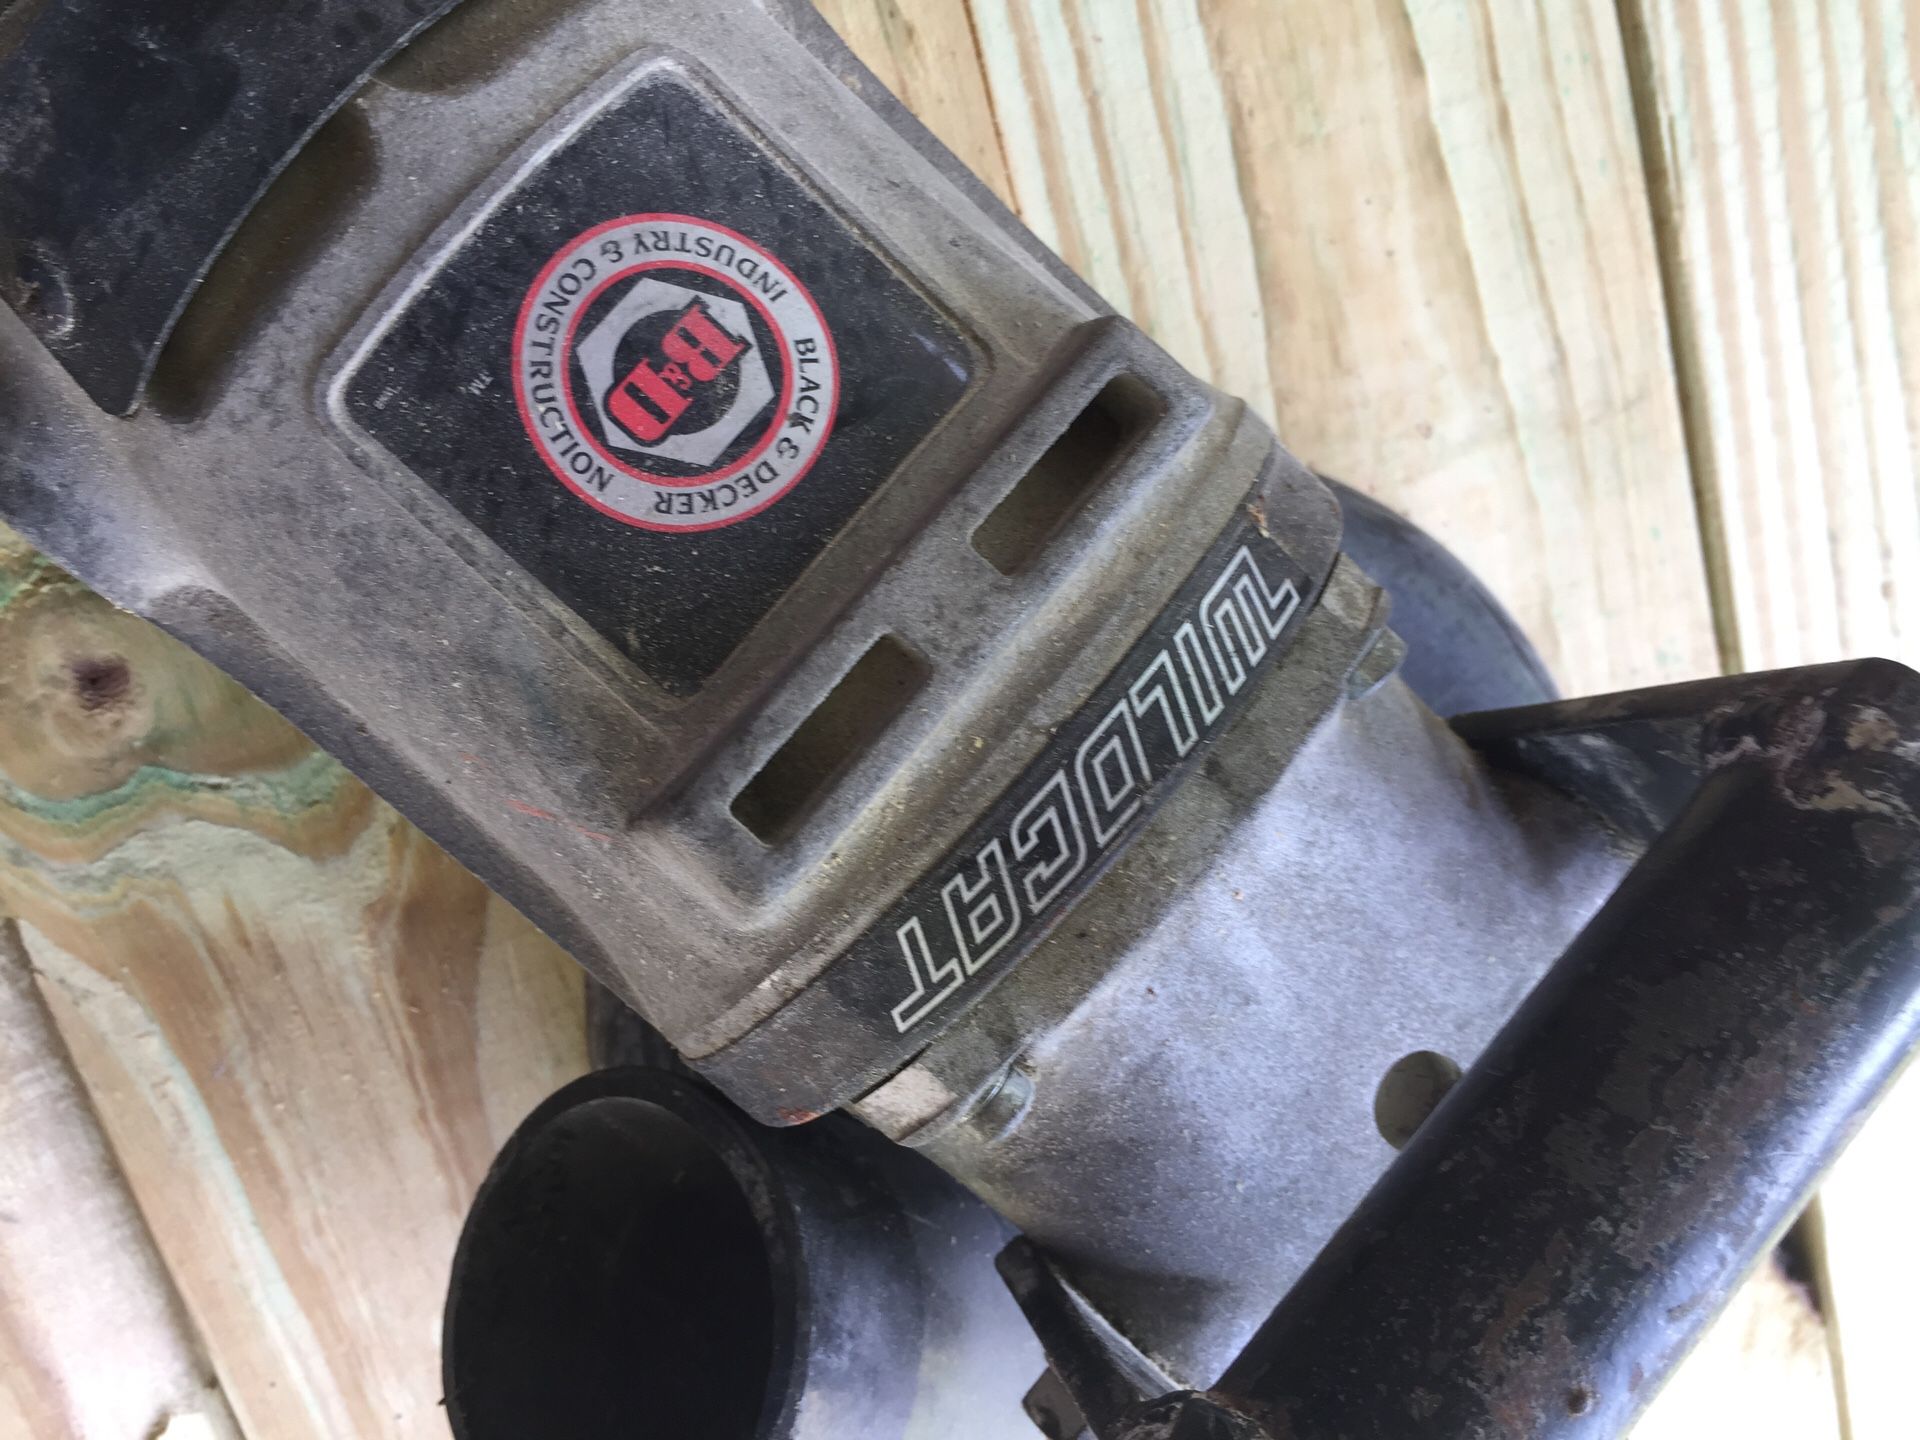 An old school cool tool - the Black and Decker 4076 Wildcat